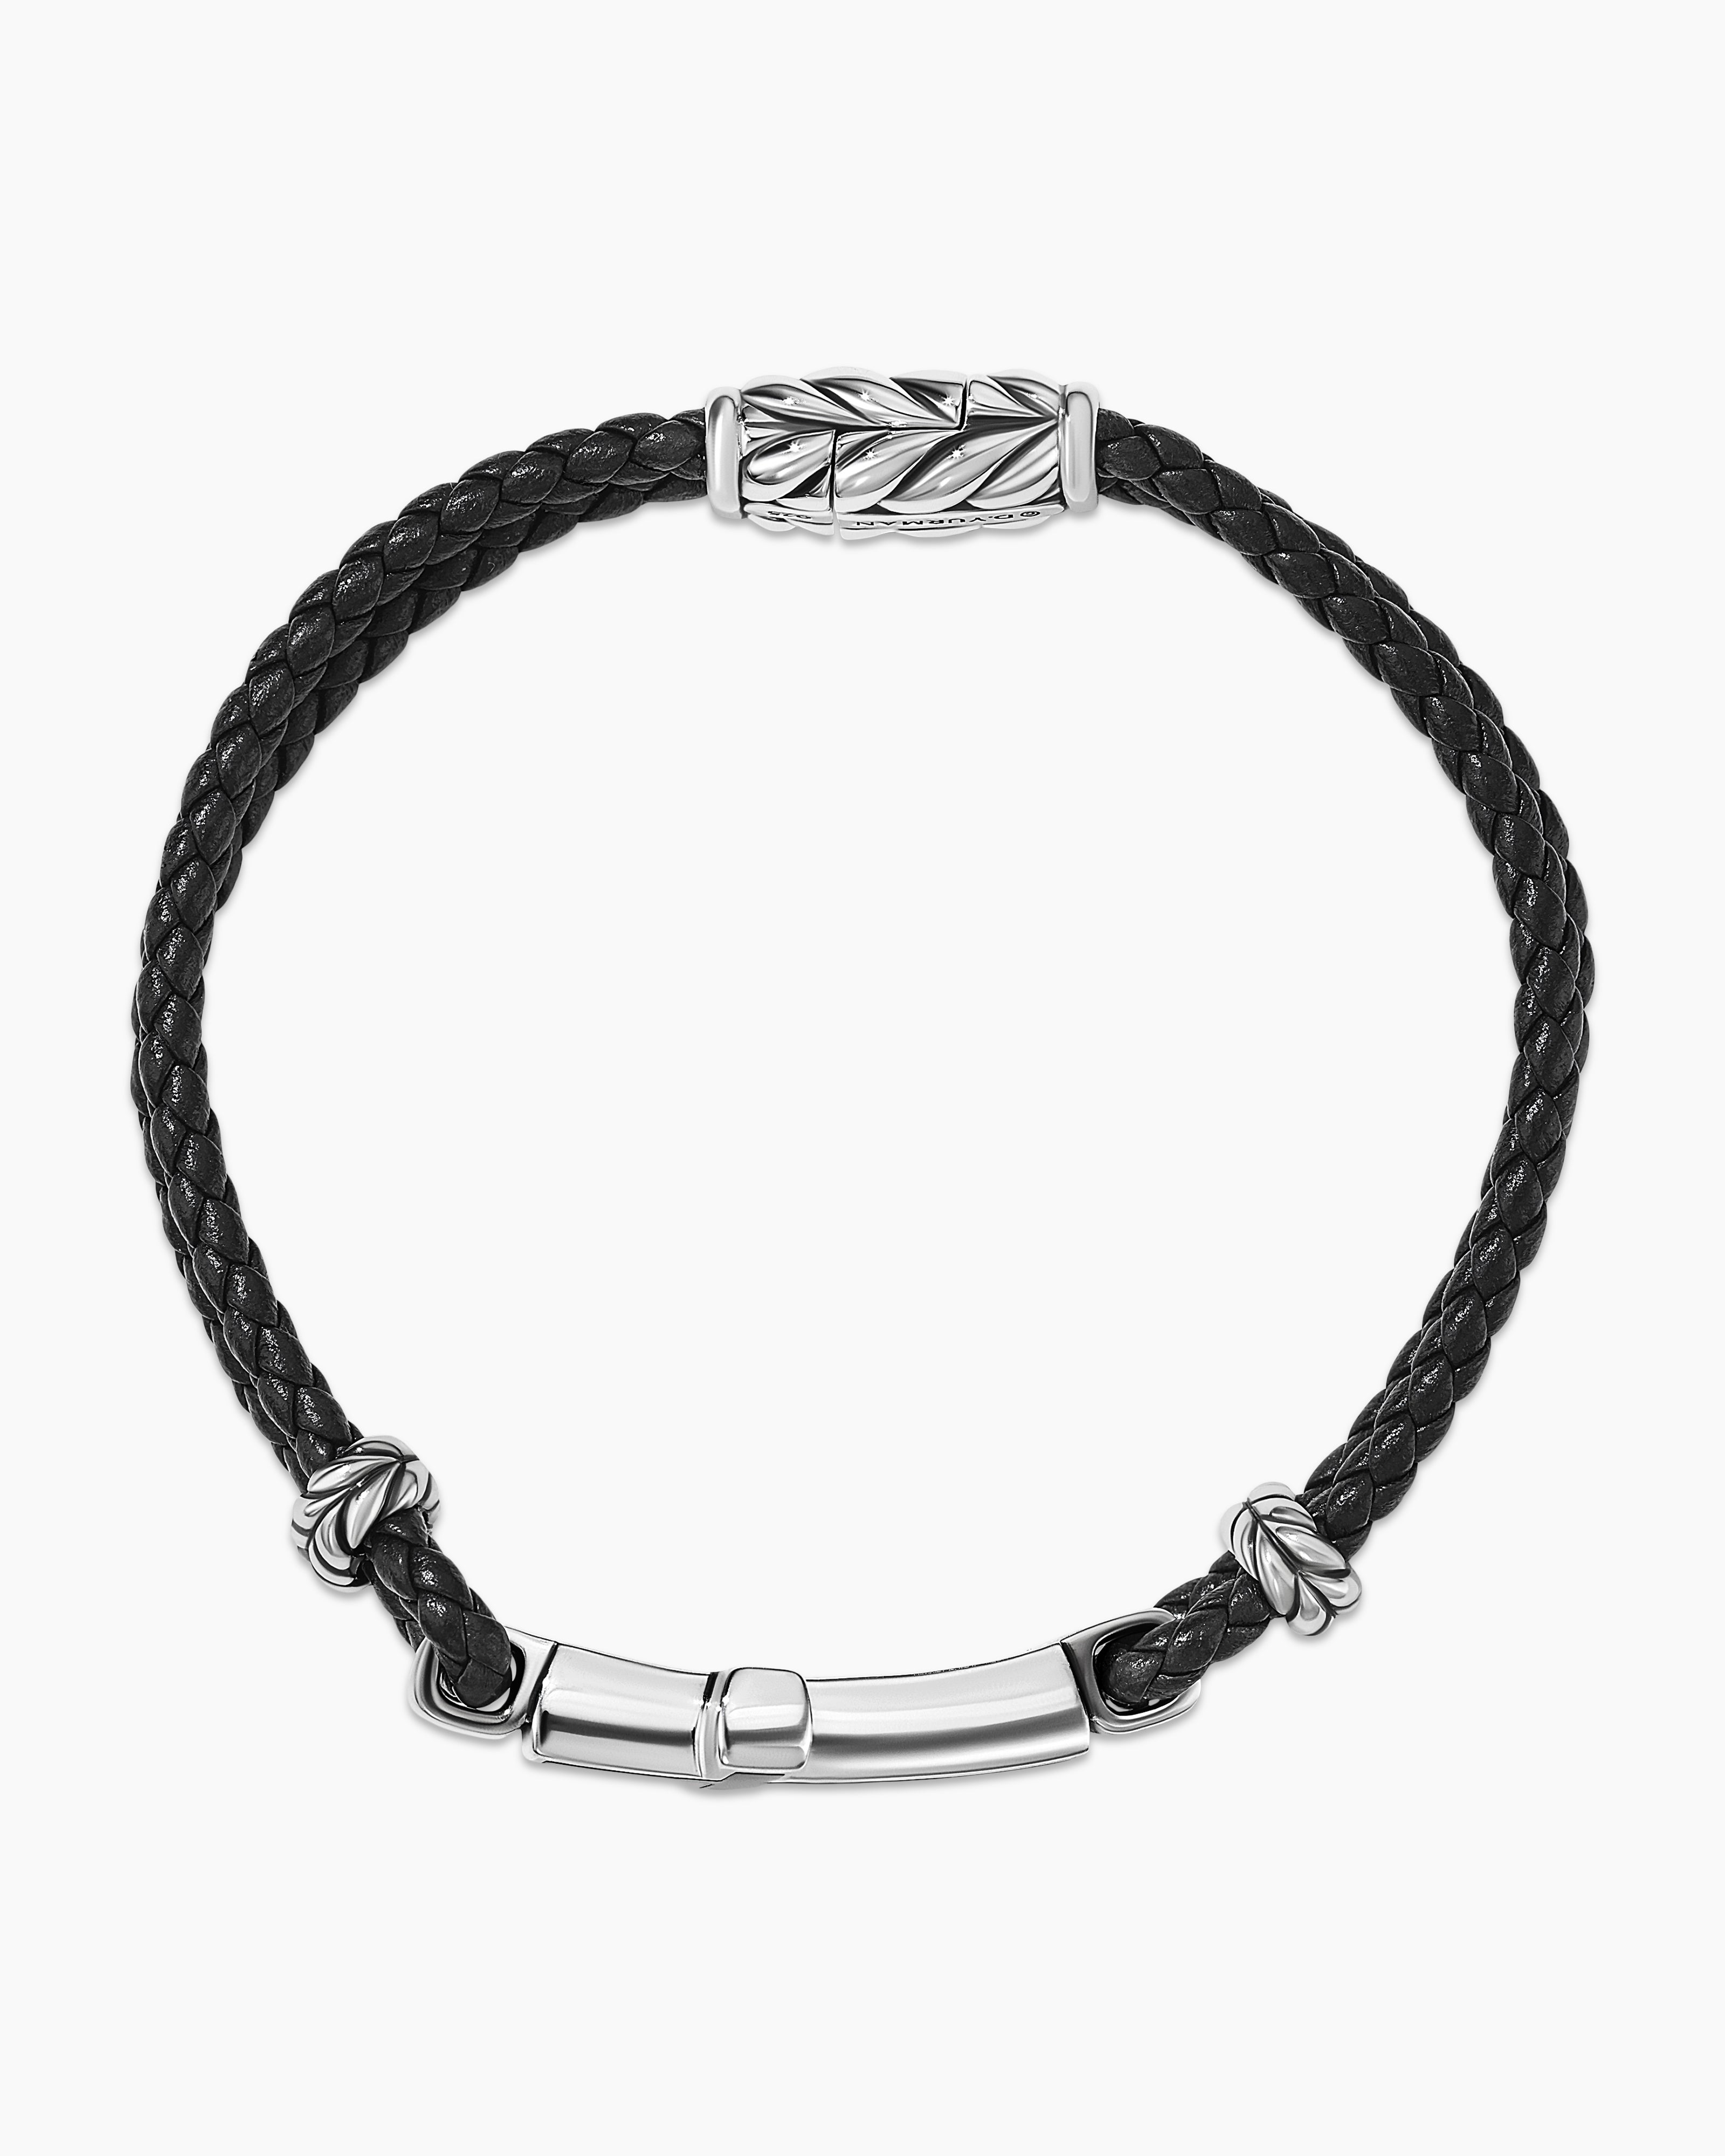 INOX Black Leather Strapped with Cross Hammered ID Bracelet